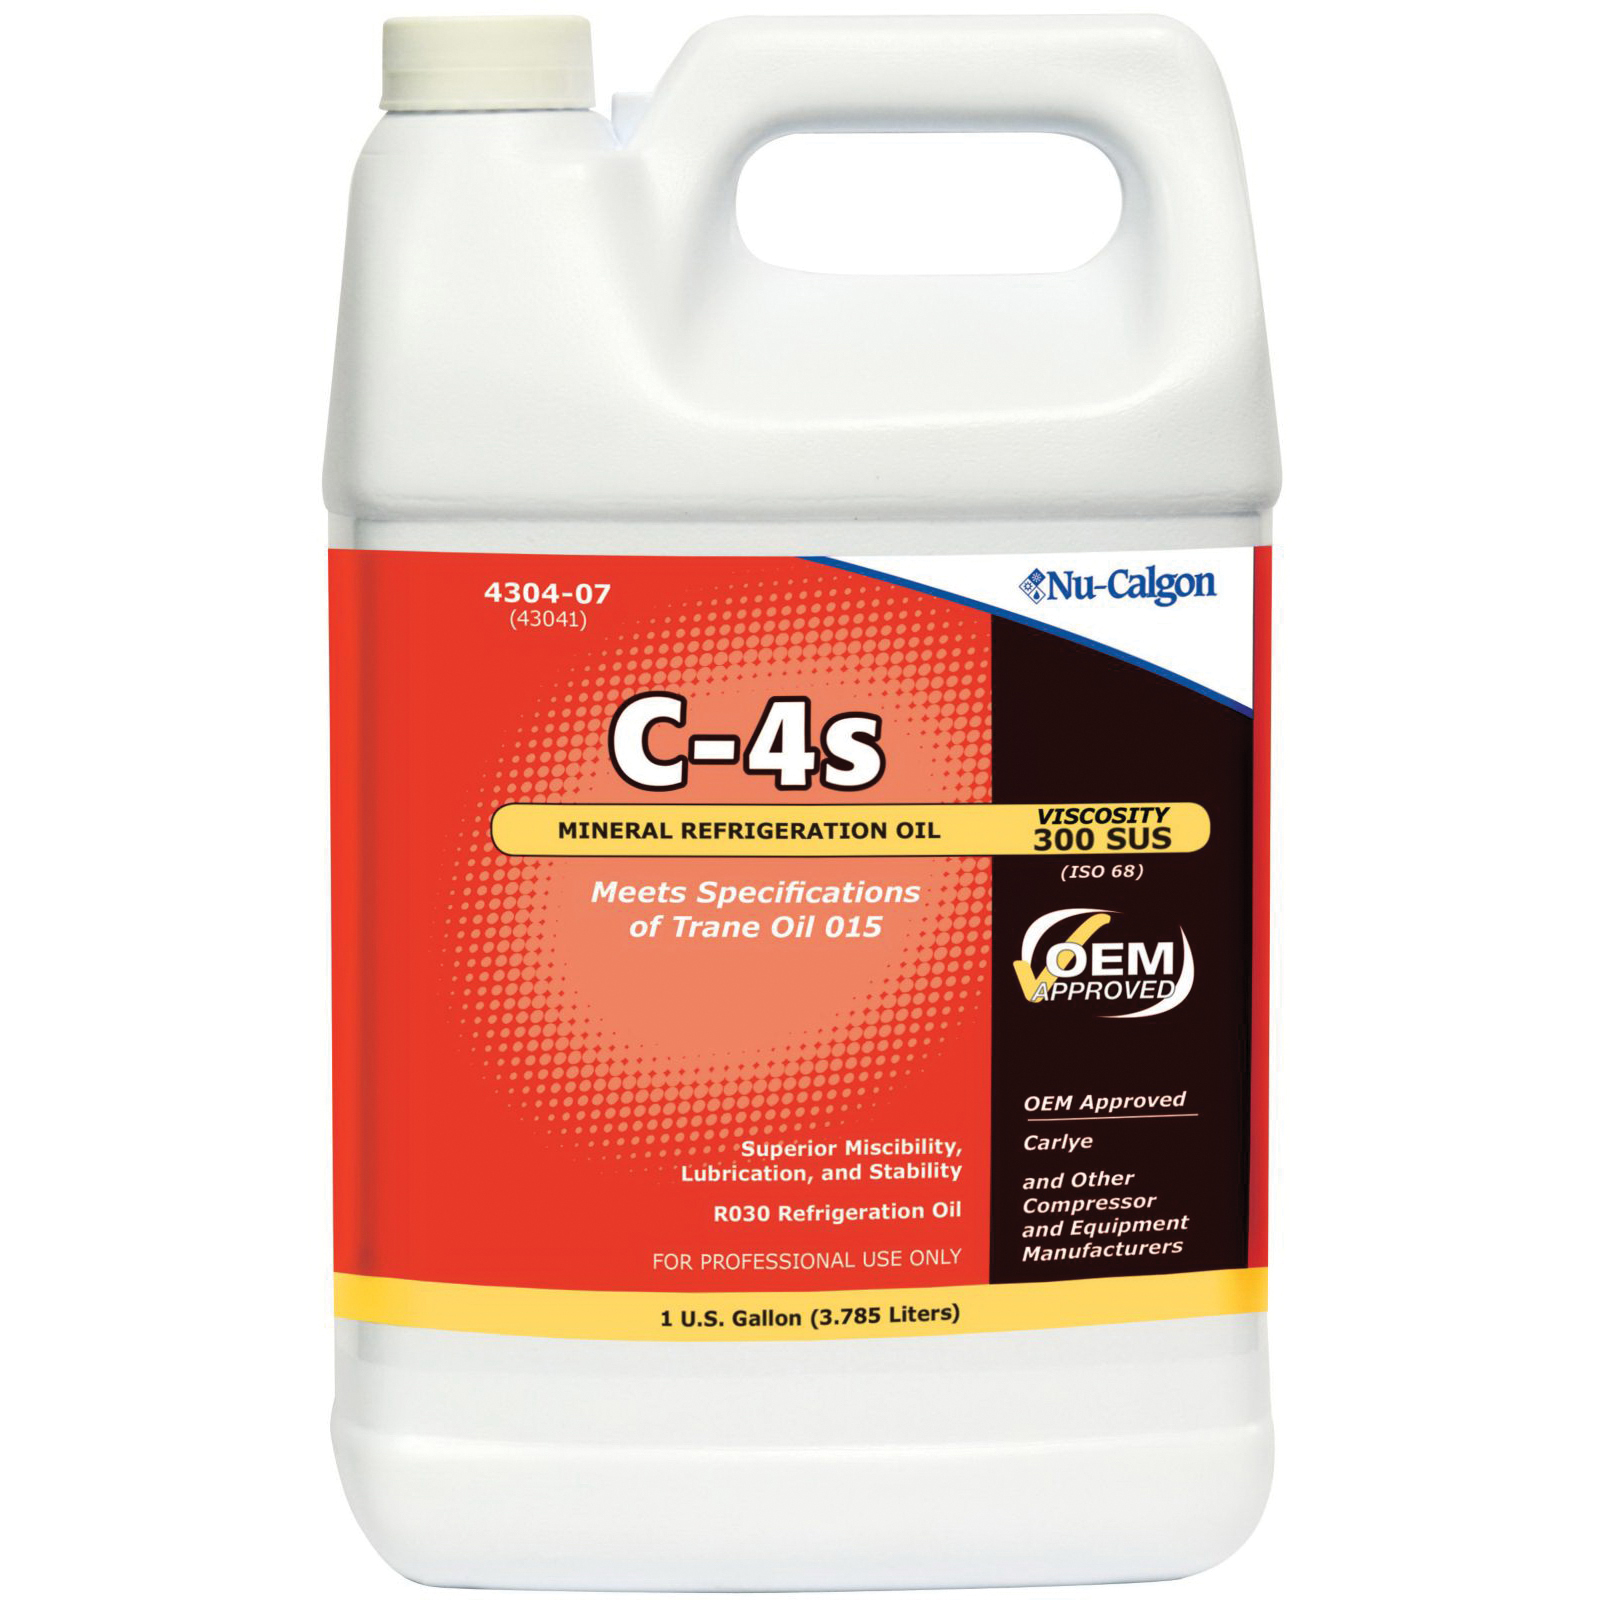 Nu-Calgon 4304-07 Refrigeration Mineral Oil, 1 gal, Bottle, Clear to Light Yellow, Hydrocarbon, 61.43 cSt Viscosity